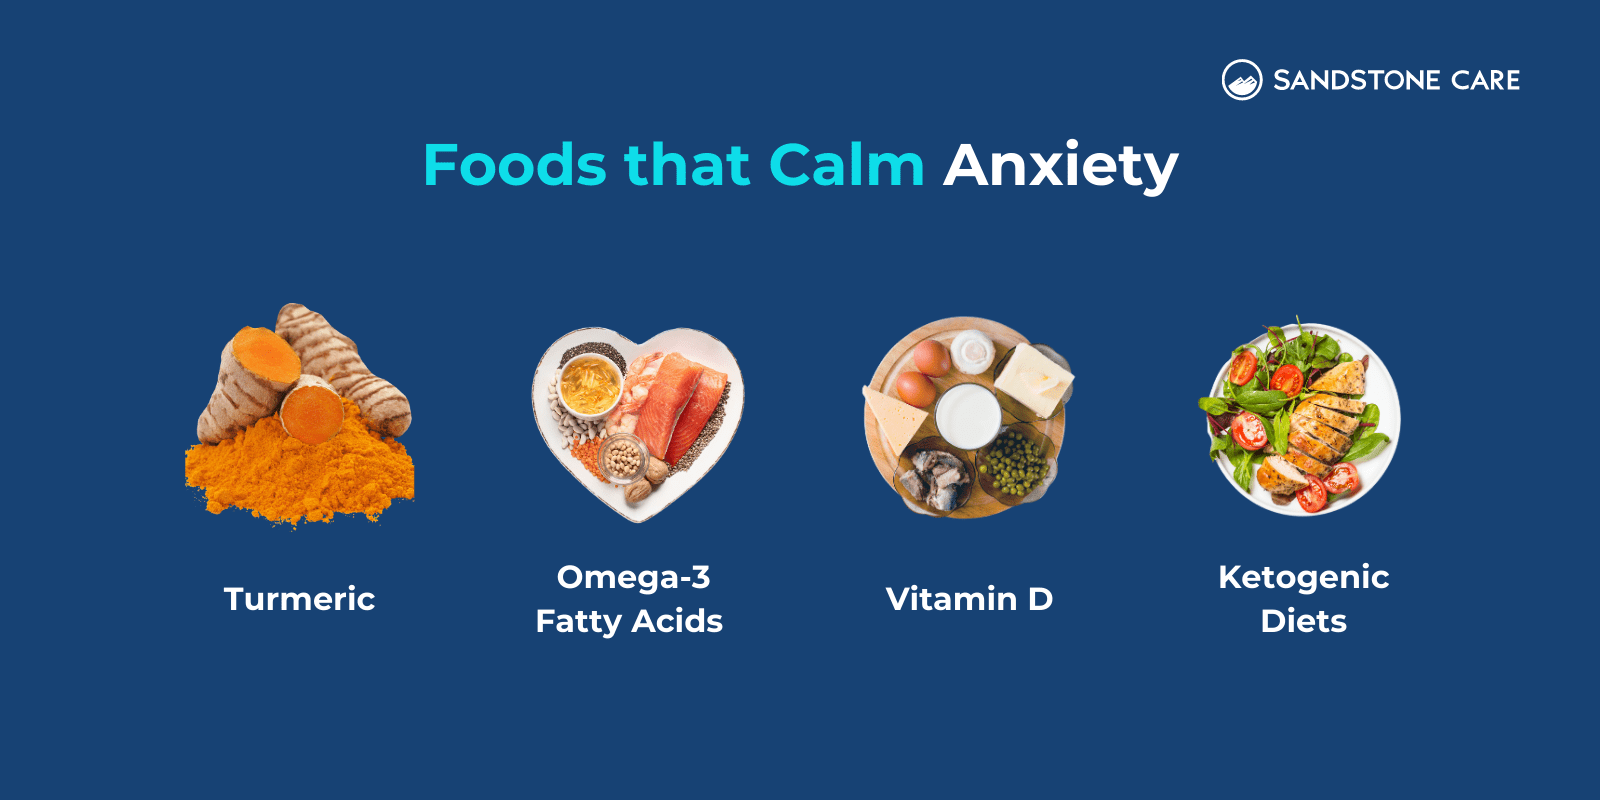 Foods That Calm Anxiety illustrated with relevant images of each food